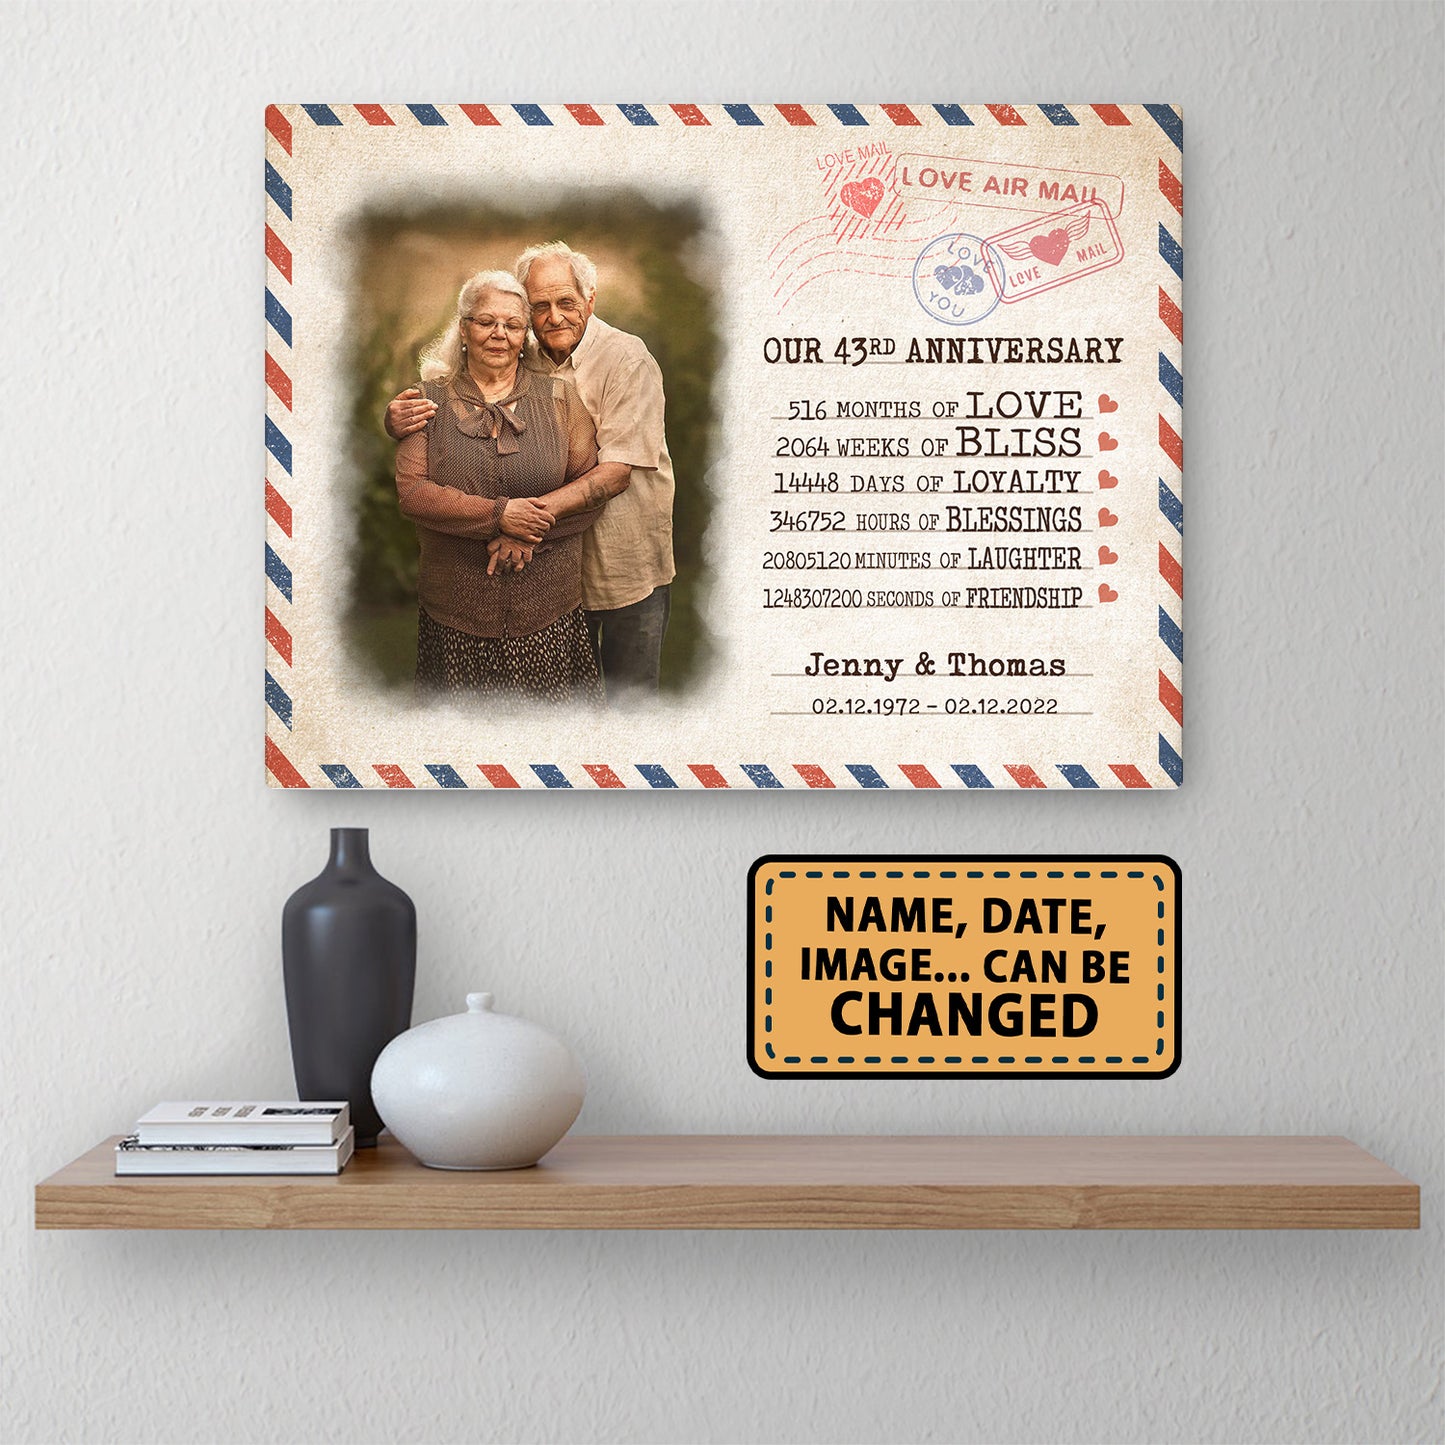 Our 43rd Anniversary Letter Valentine Gift Personalized Canvas